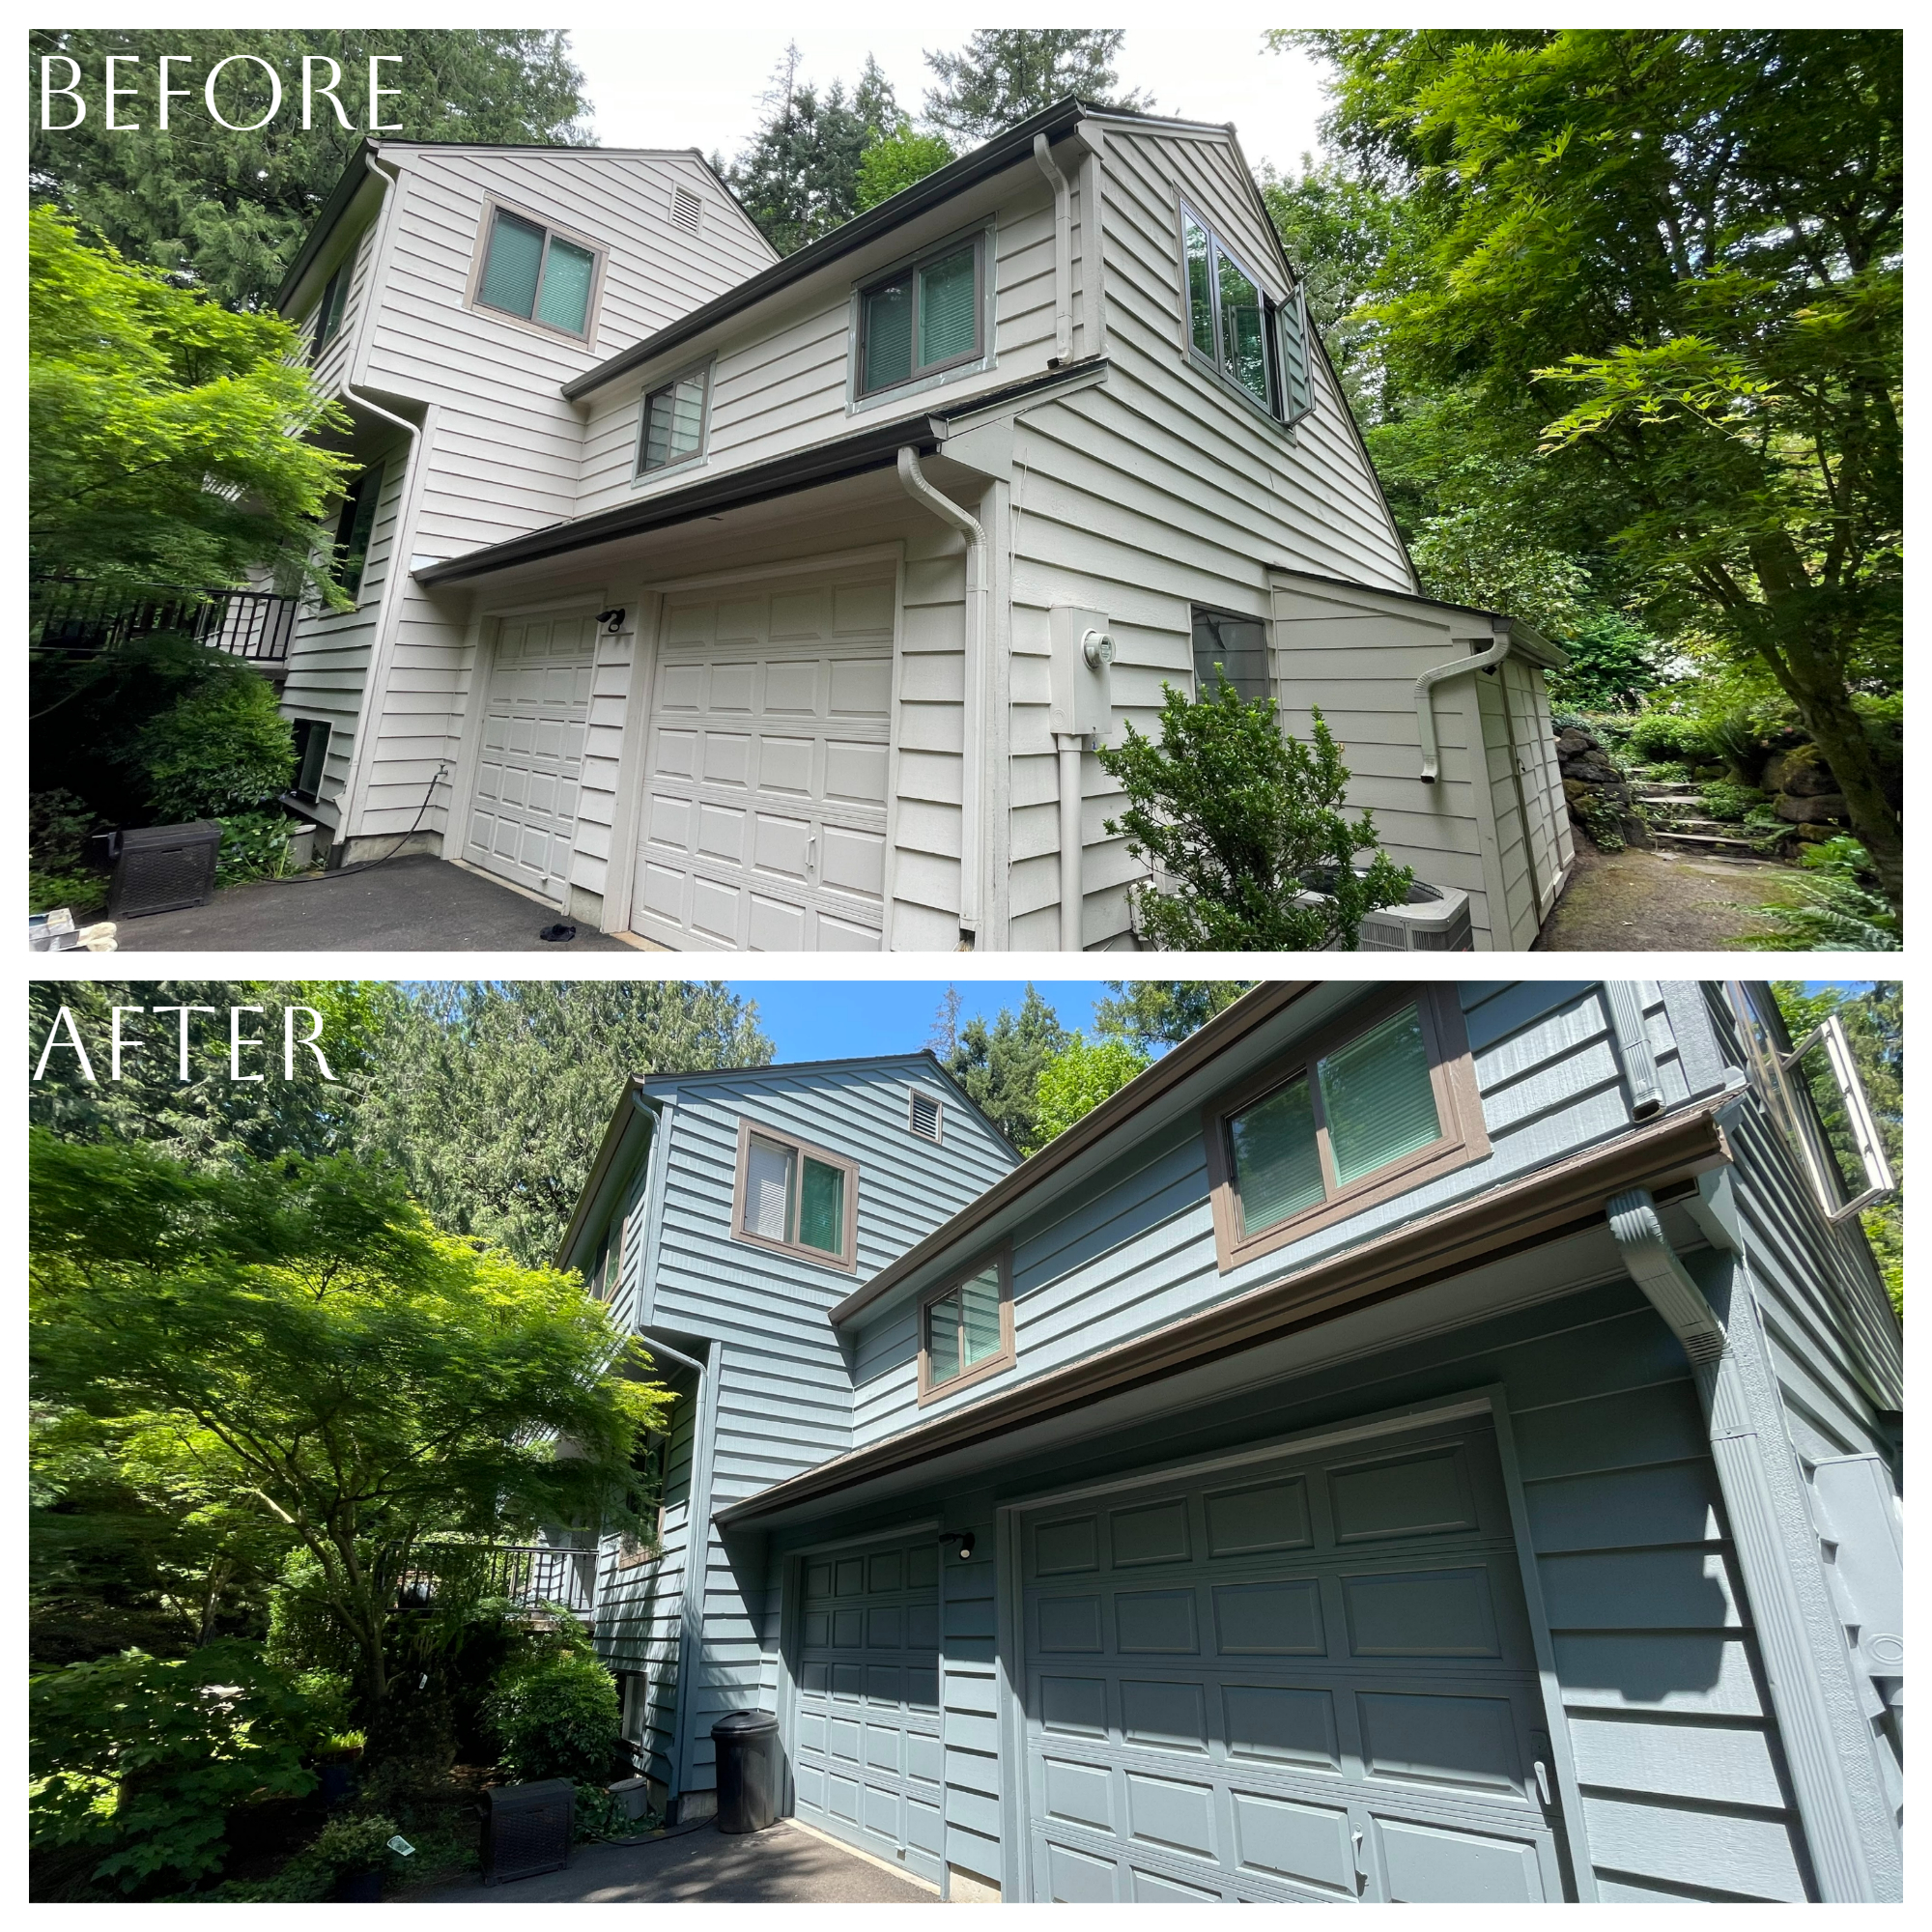 Two pictures of a house before and after its exterior paint job.